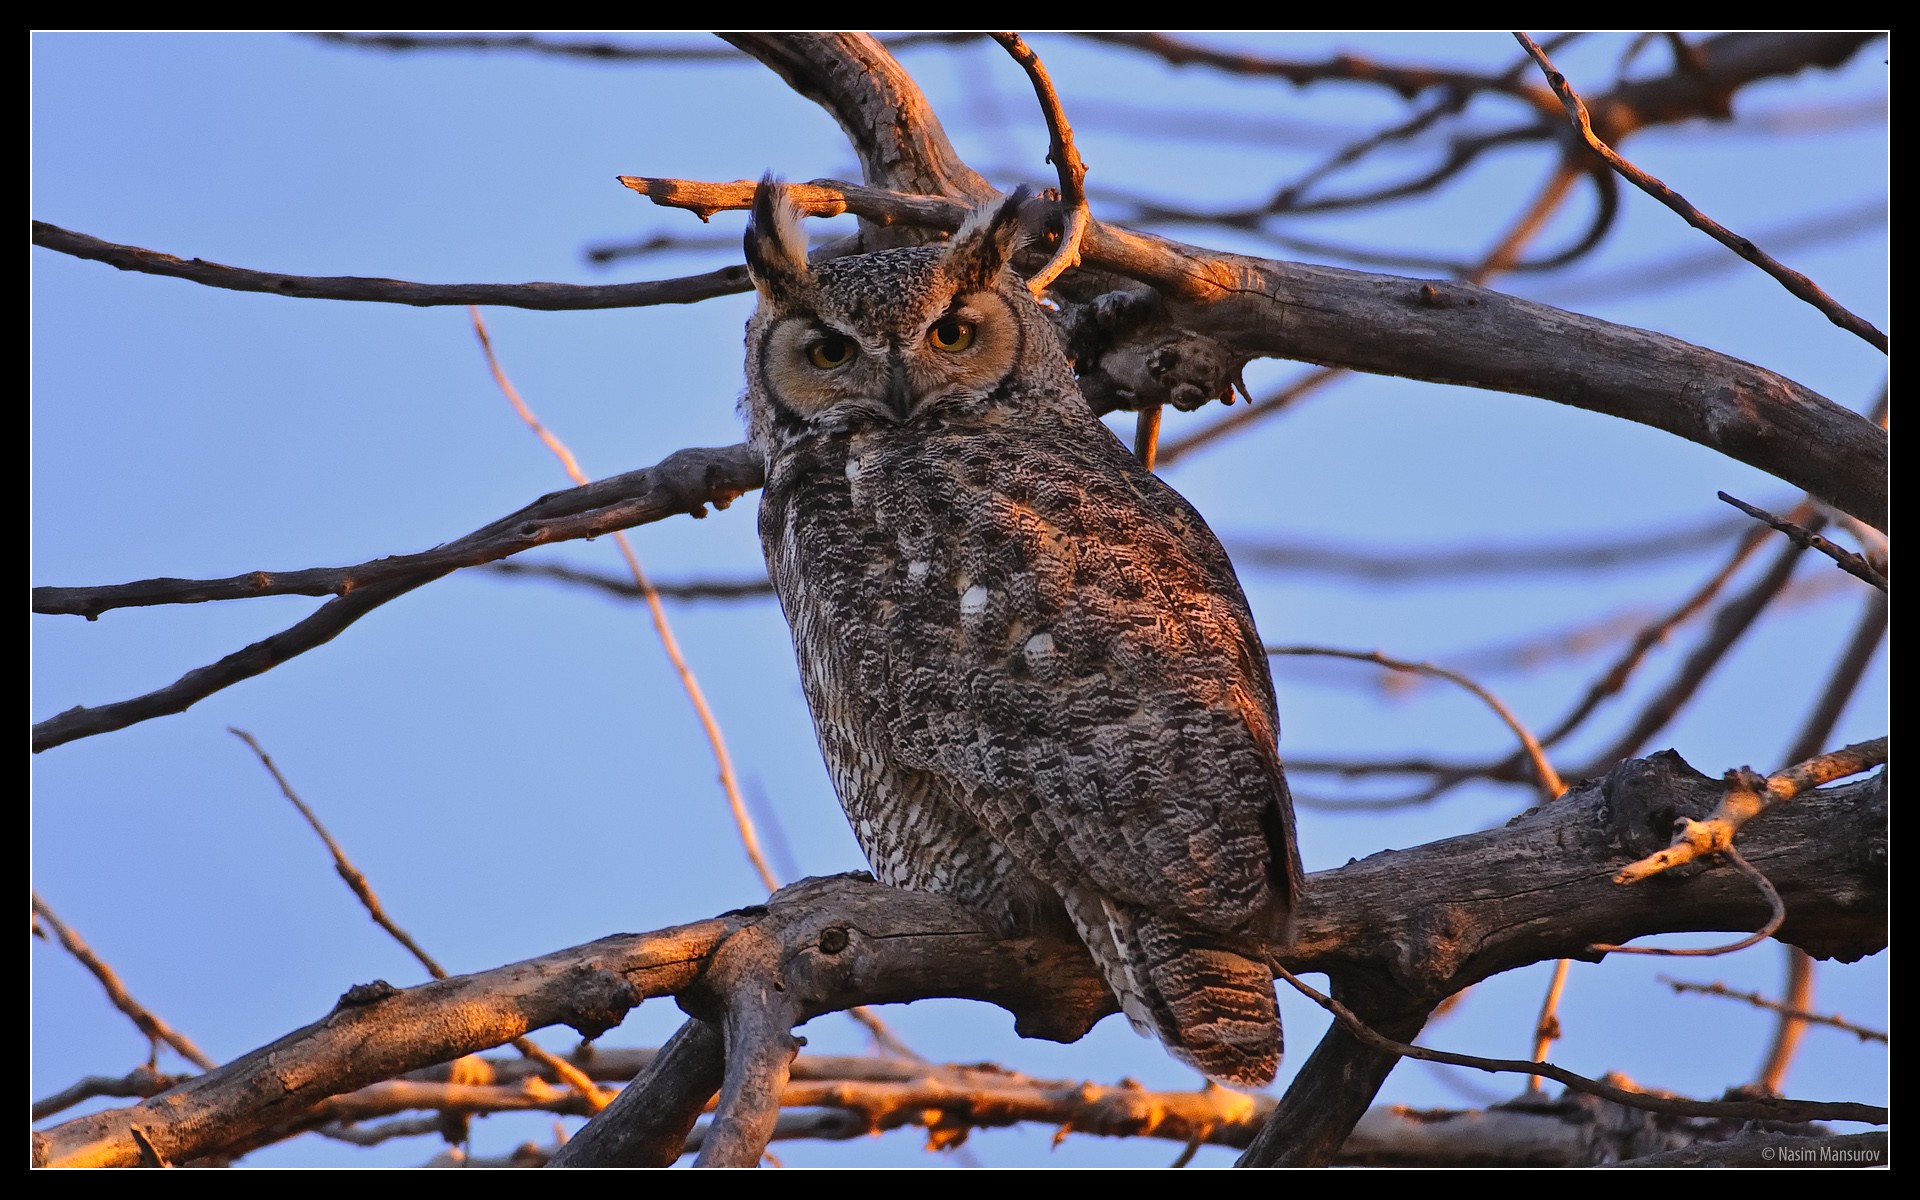 Great Horned Owl Wallpapers